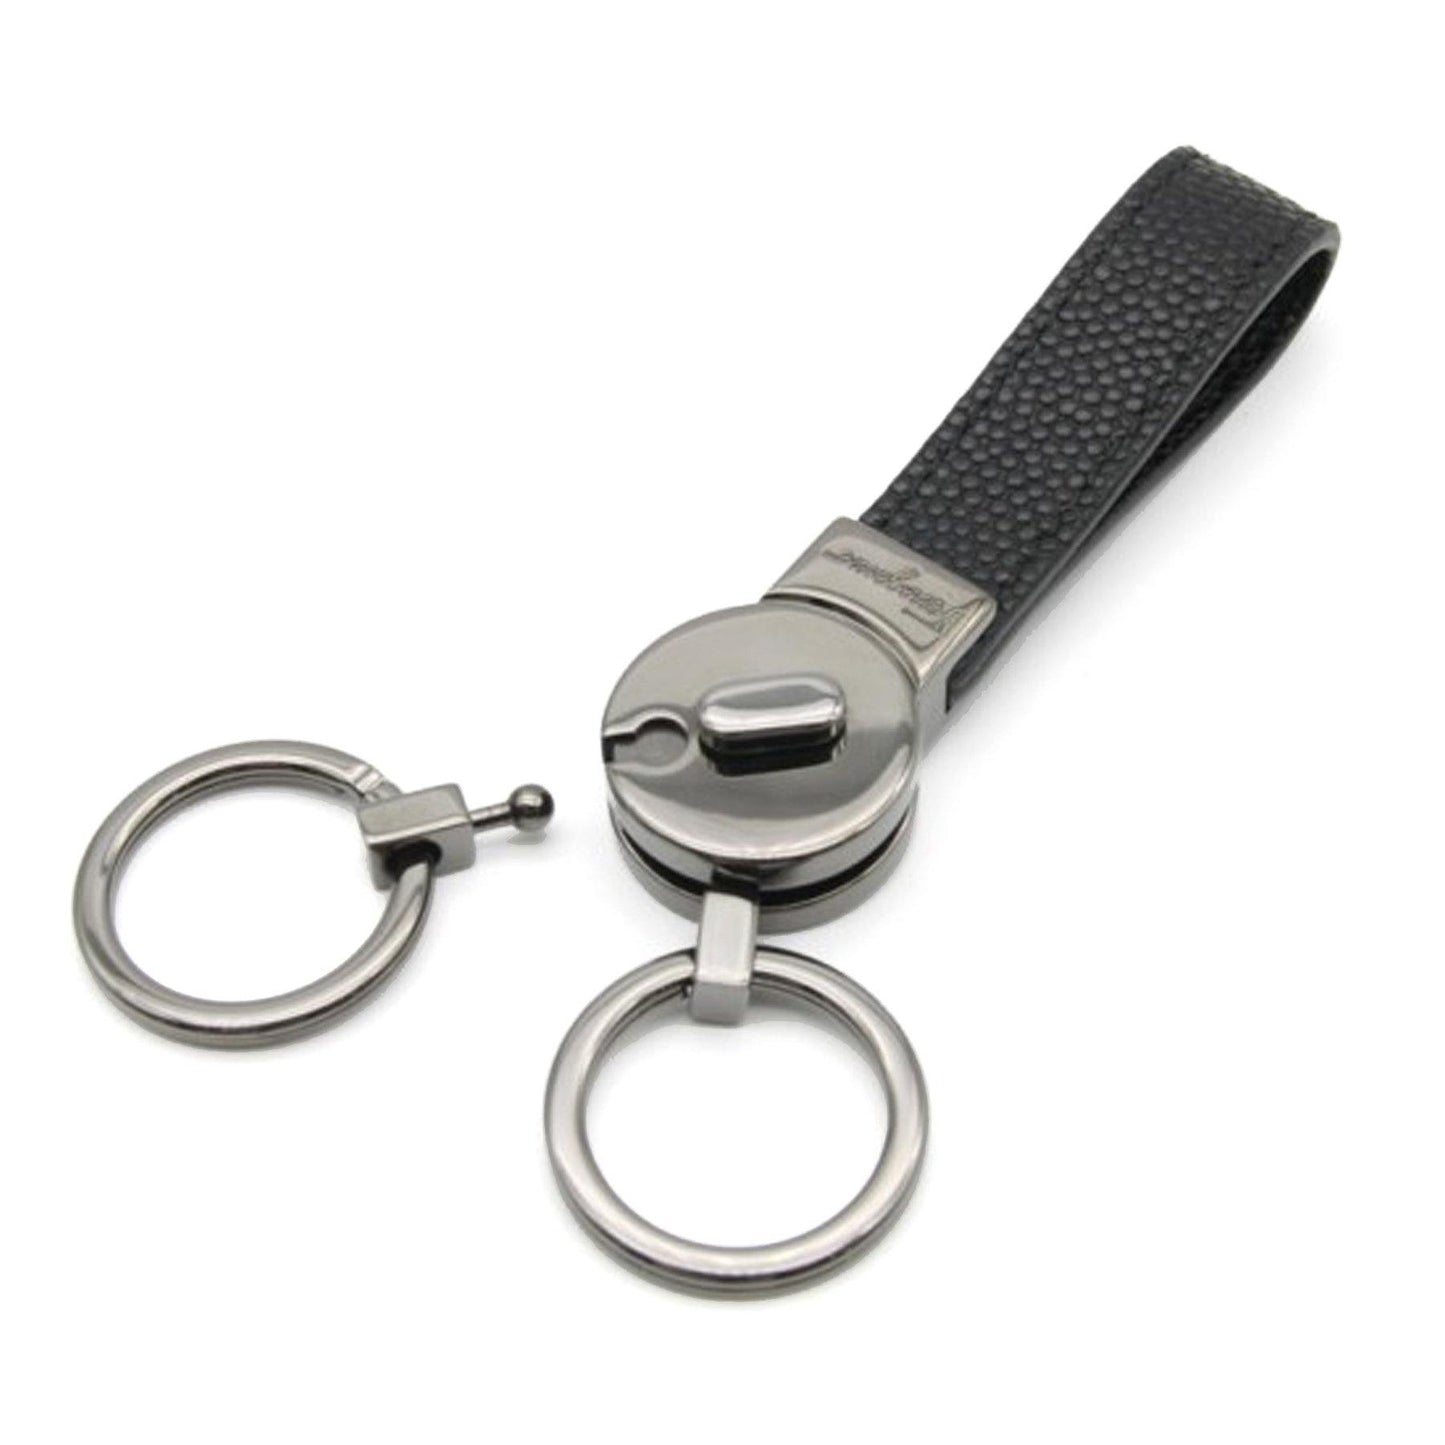 Pebbled Leather Valet Keychain - Cosmos Boutique New Jersey